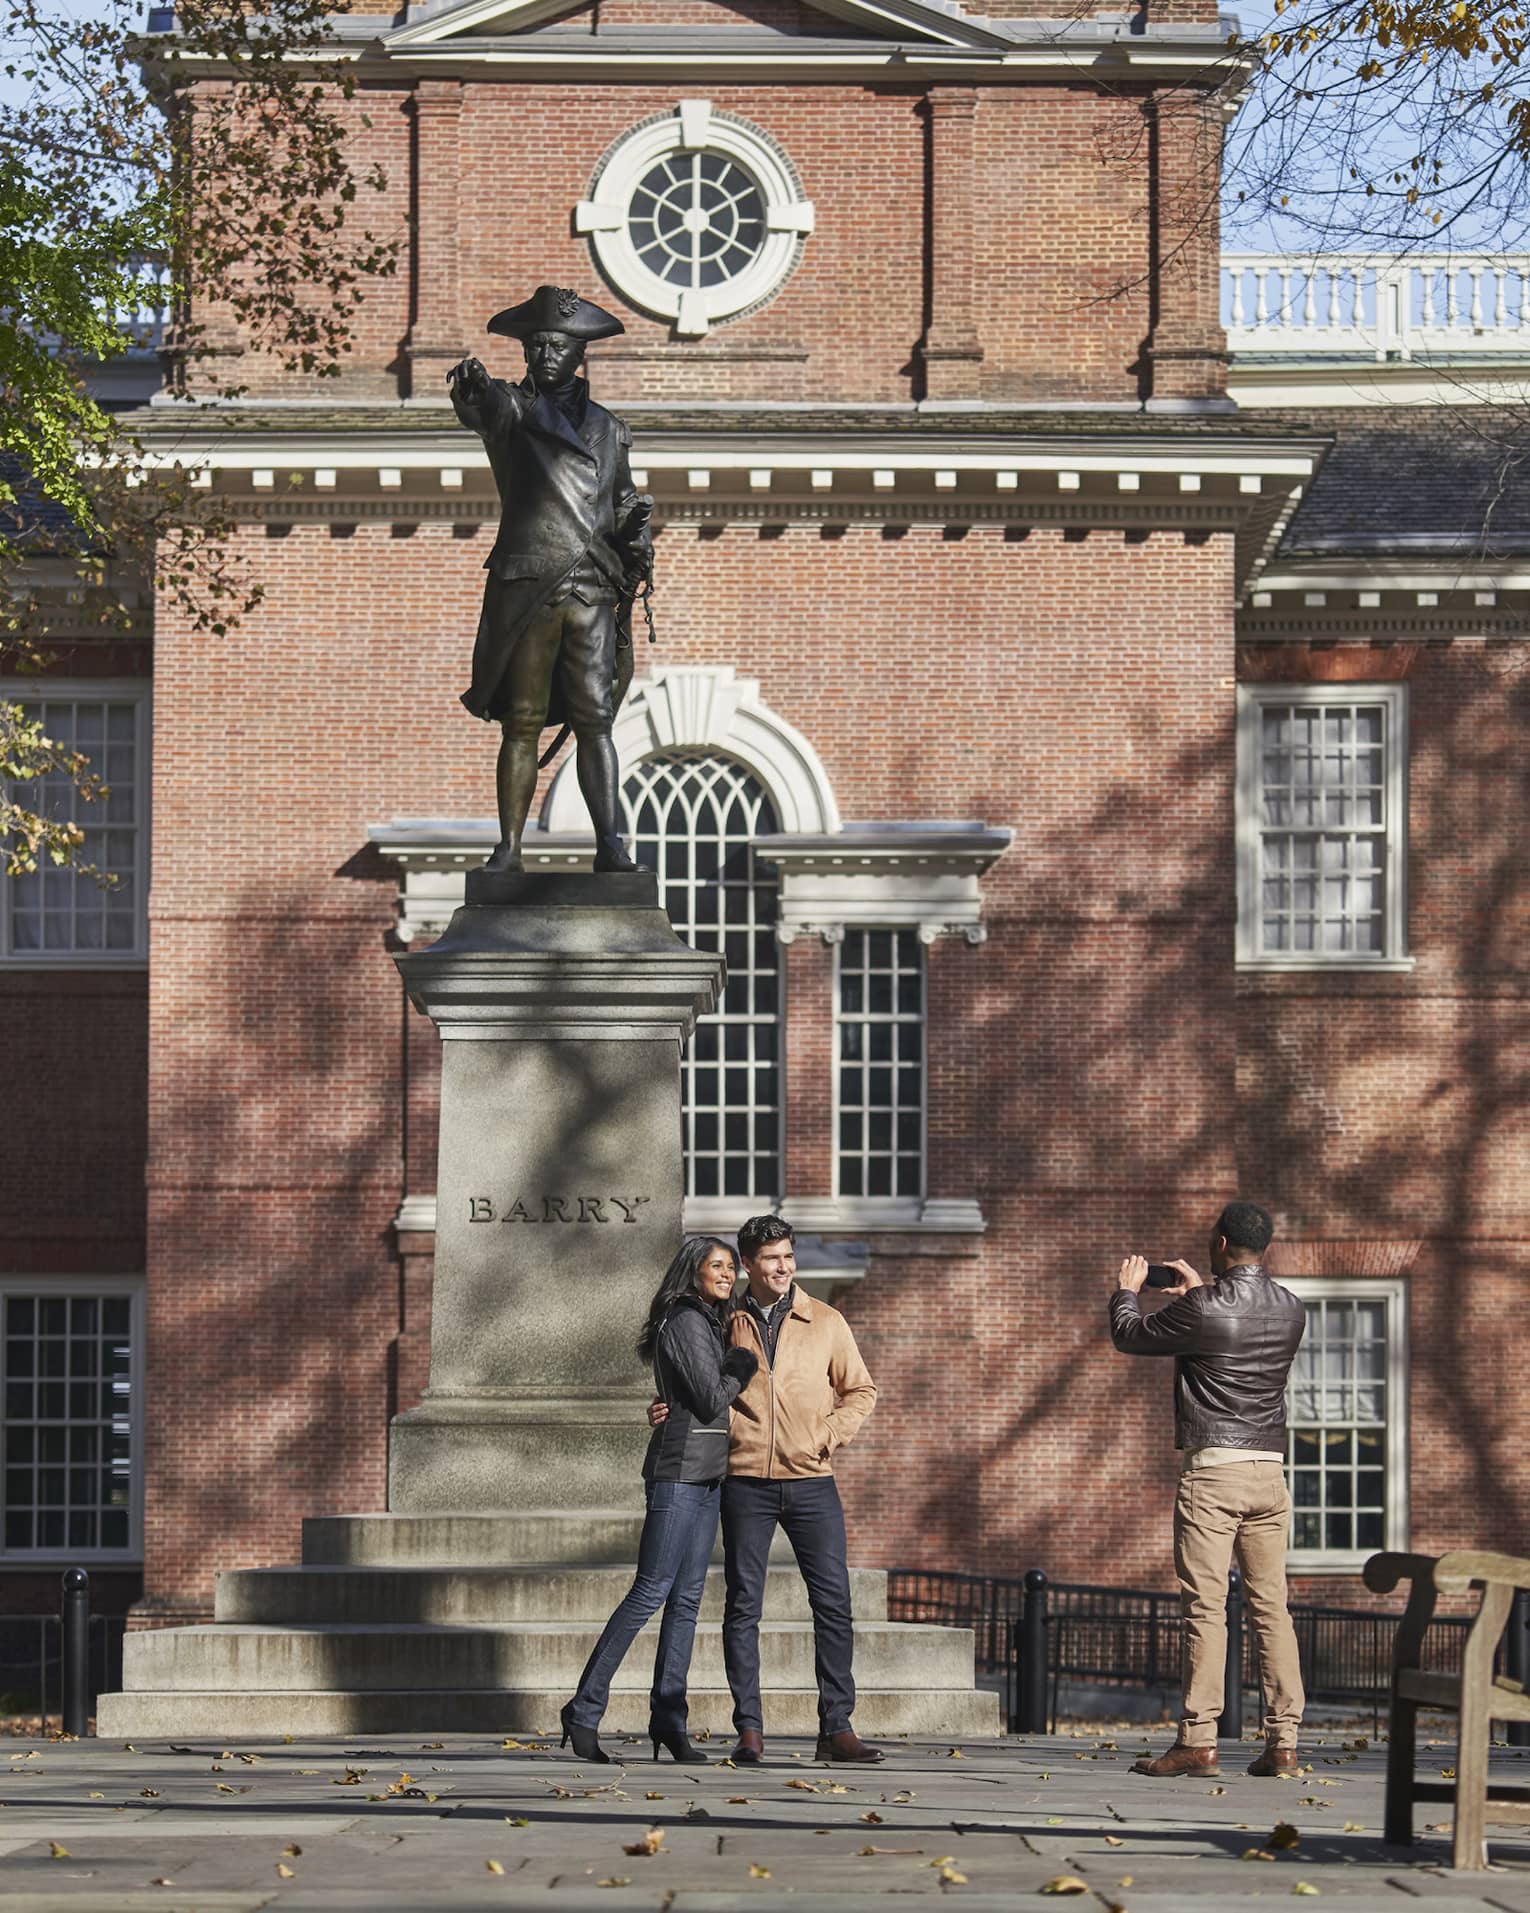 Couple poses for photo in front of statue and historic building